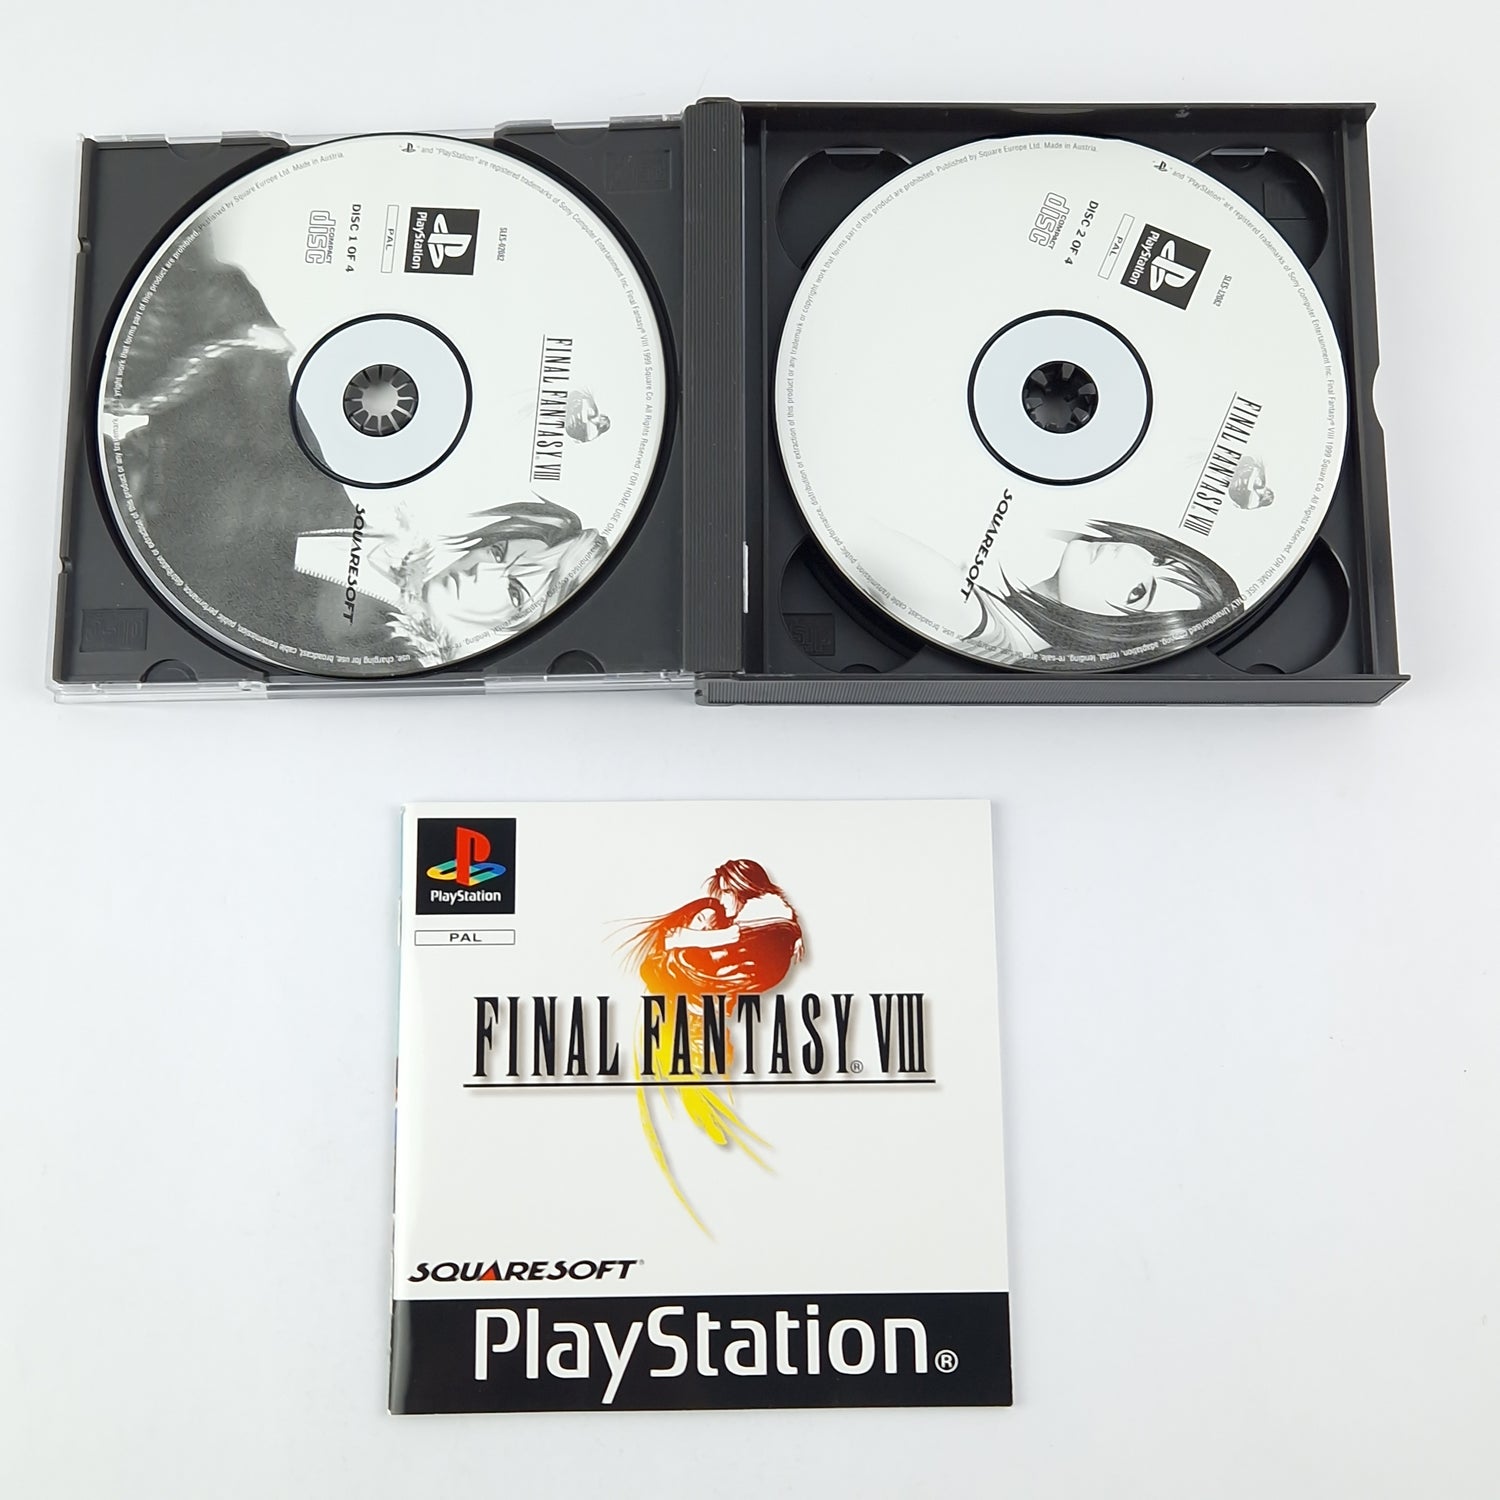 Playstation 1 Game: Final Fantasy VIII - OVP Double Case PS1 PSX Psone PAL FF8